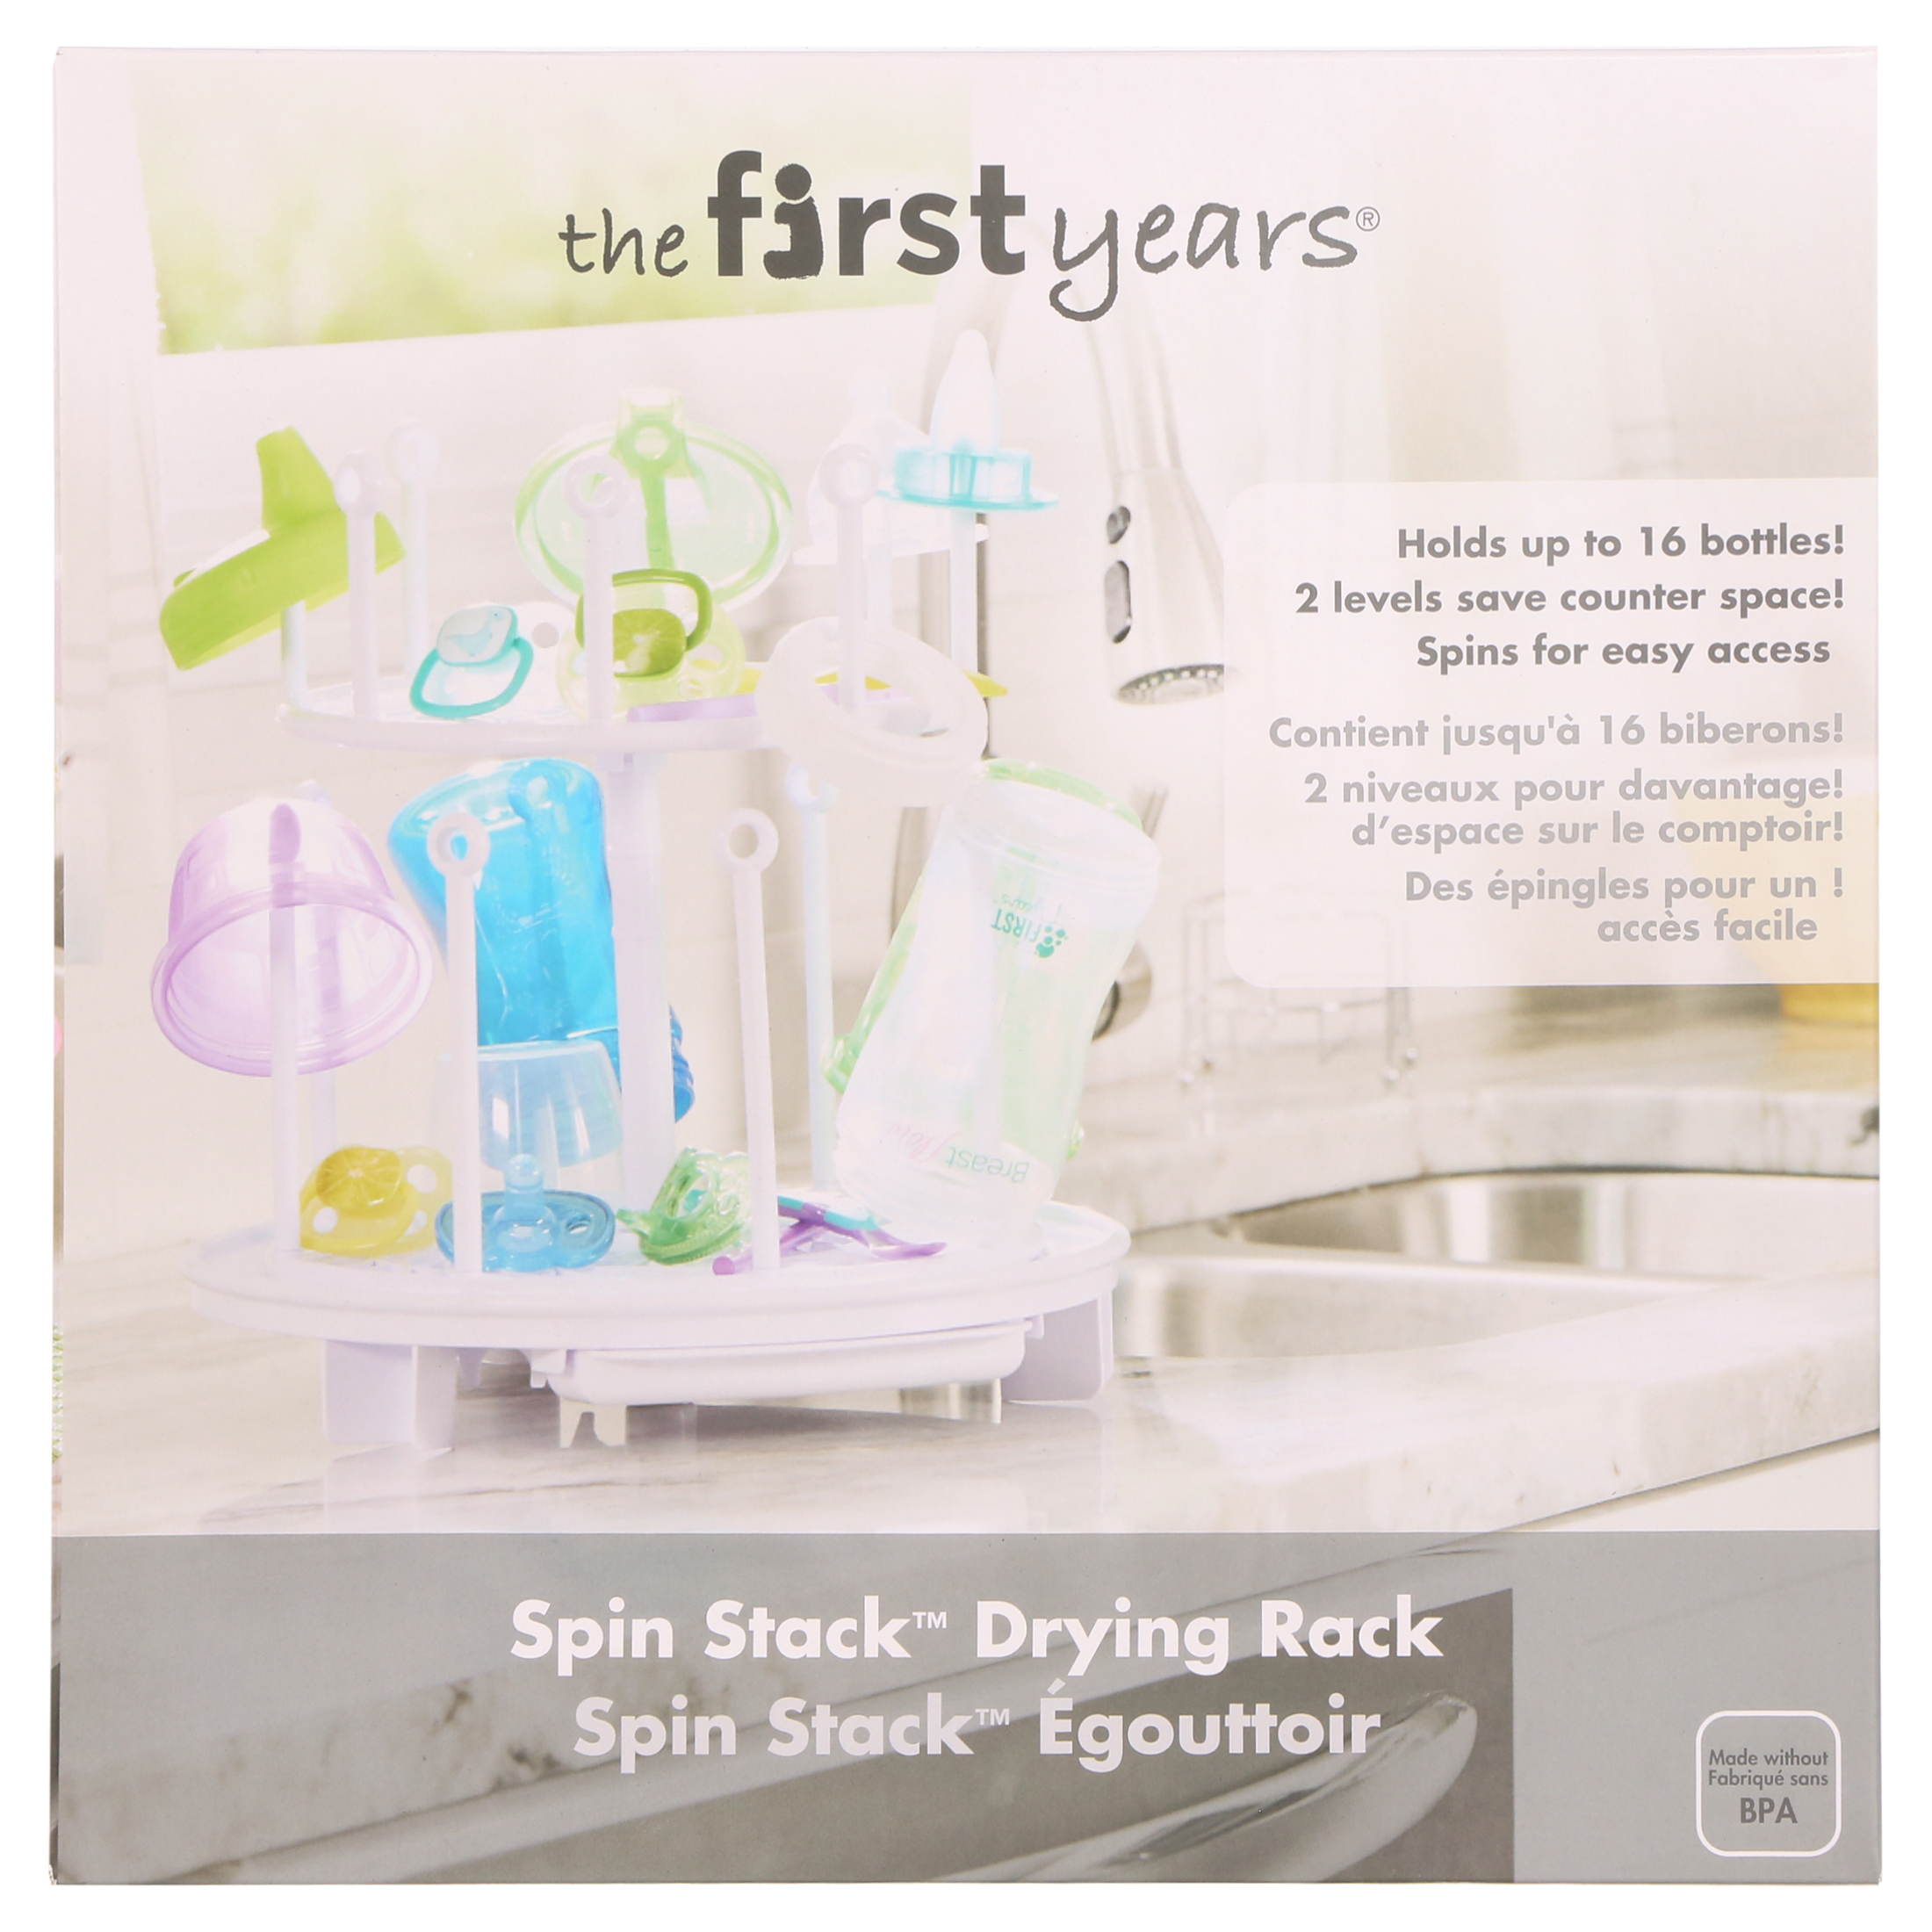 The First Years Spin Stack Drying Rack – Kitchen Countertop Dish Rack for Baby Bottles and Other Baby Essentials – White - image 4 of 10